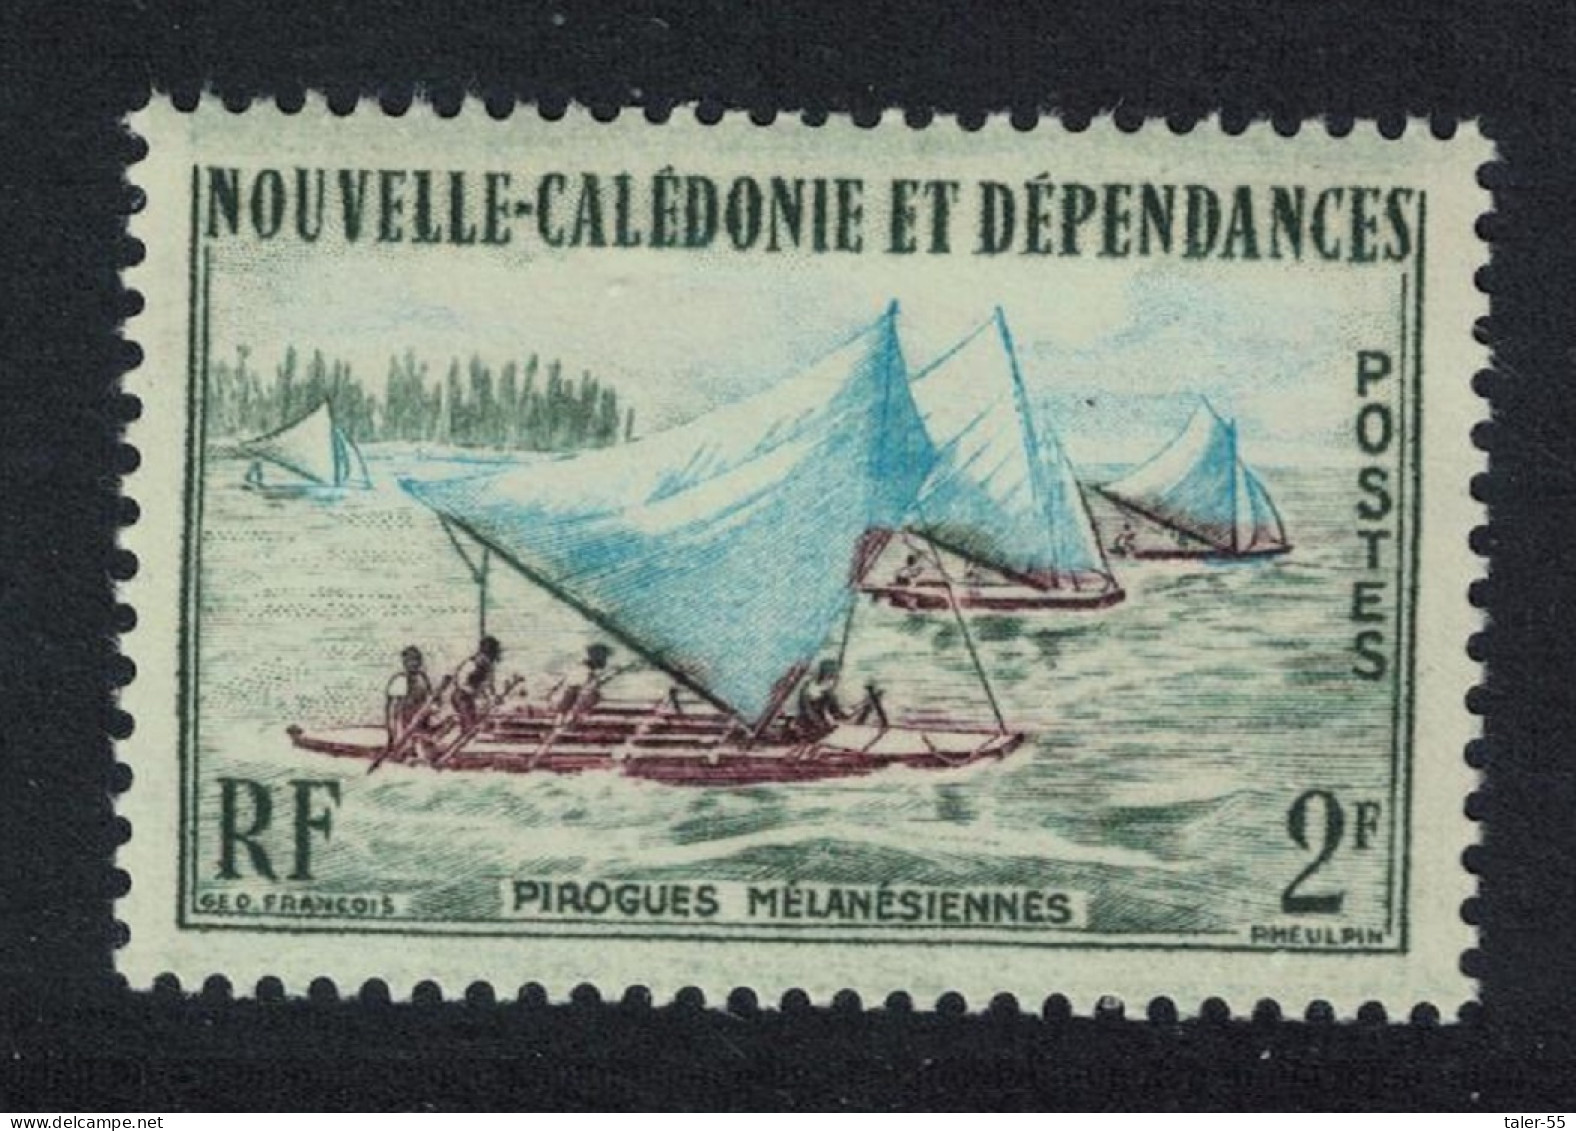 New Caledonia Outrigger Canoes Racing 2f 1959 MNH SG#345 - Neufs